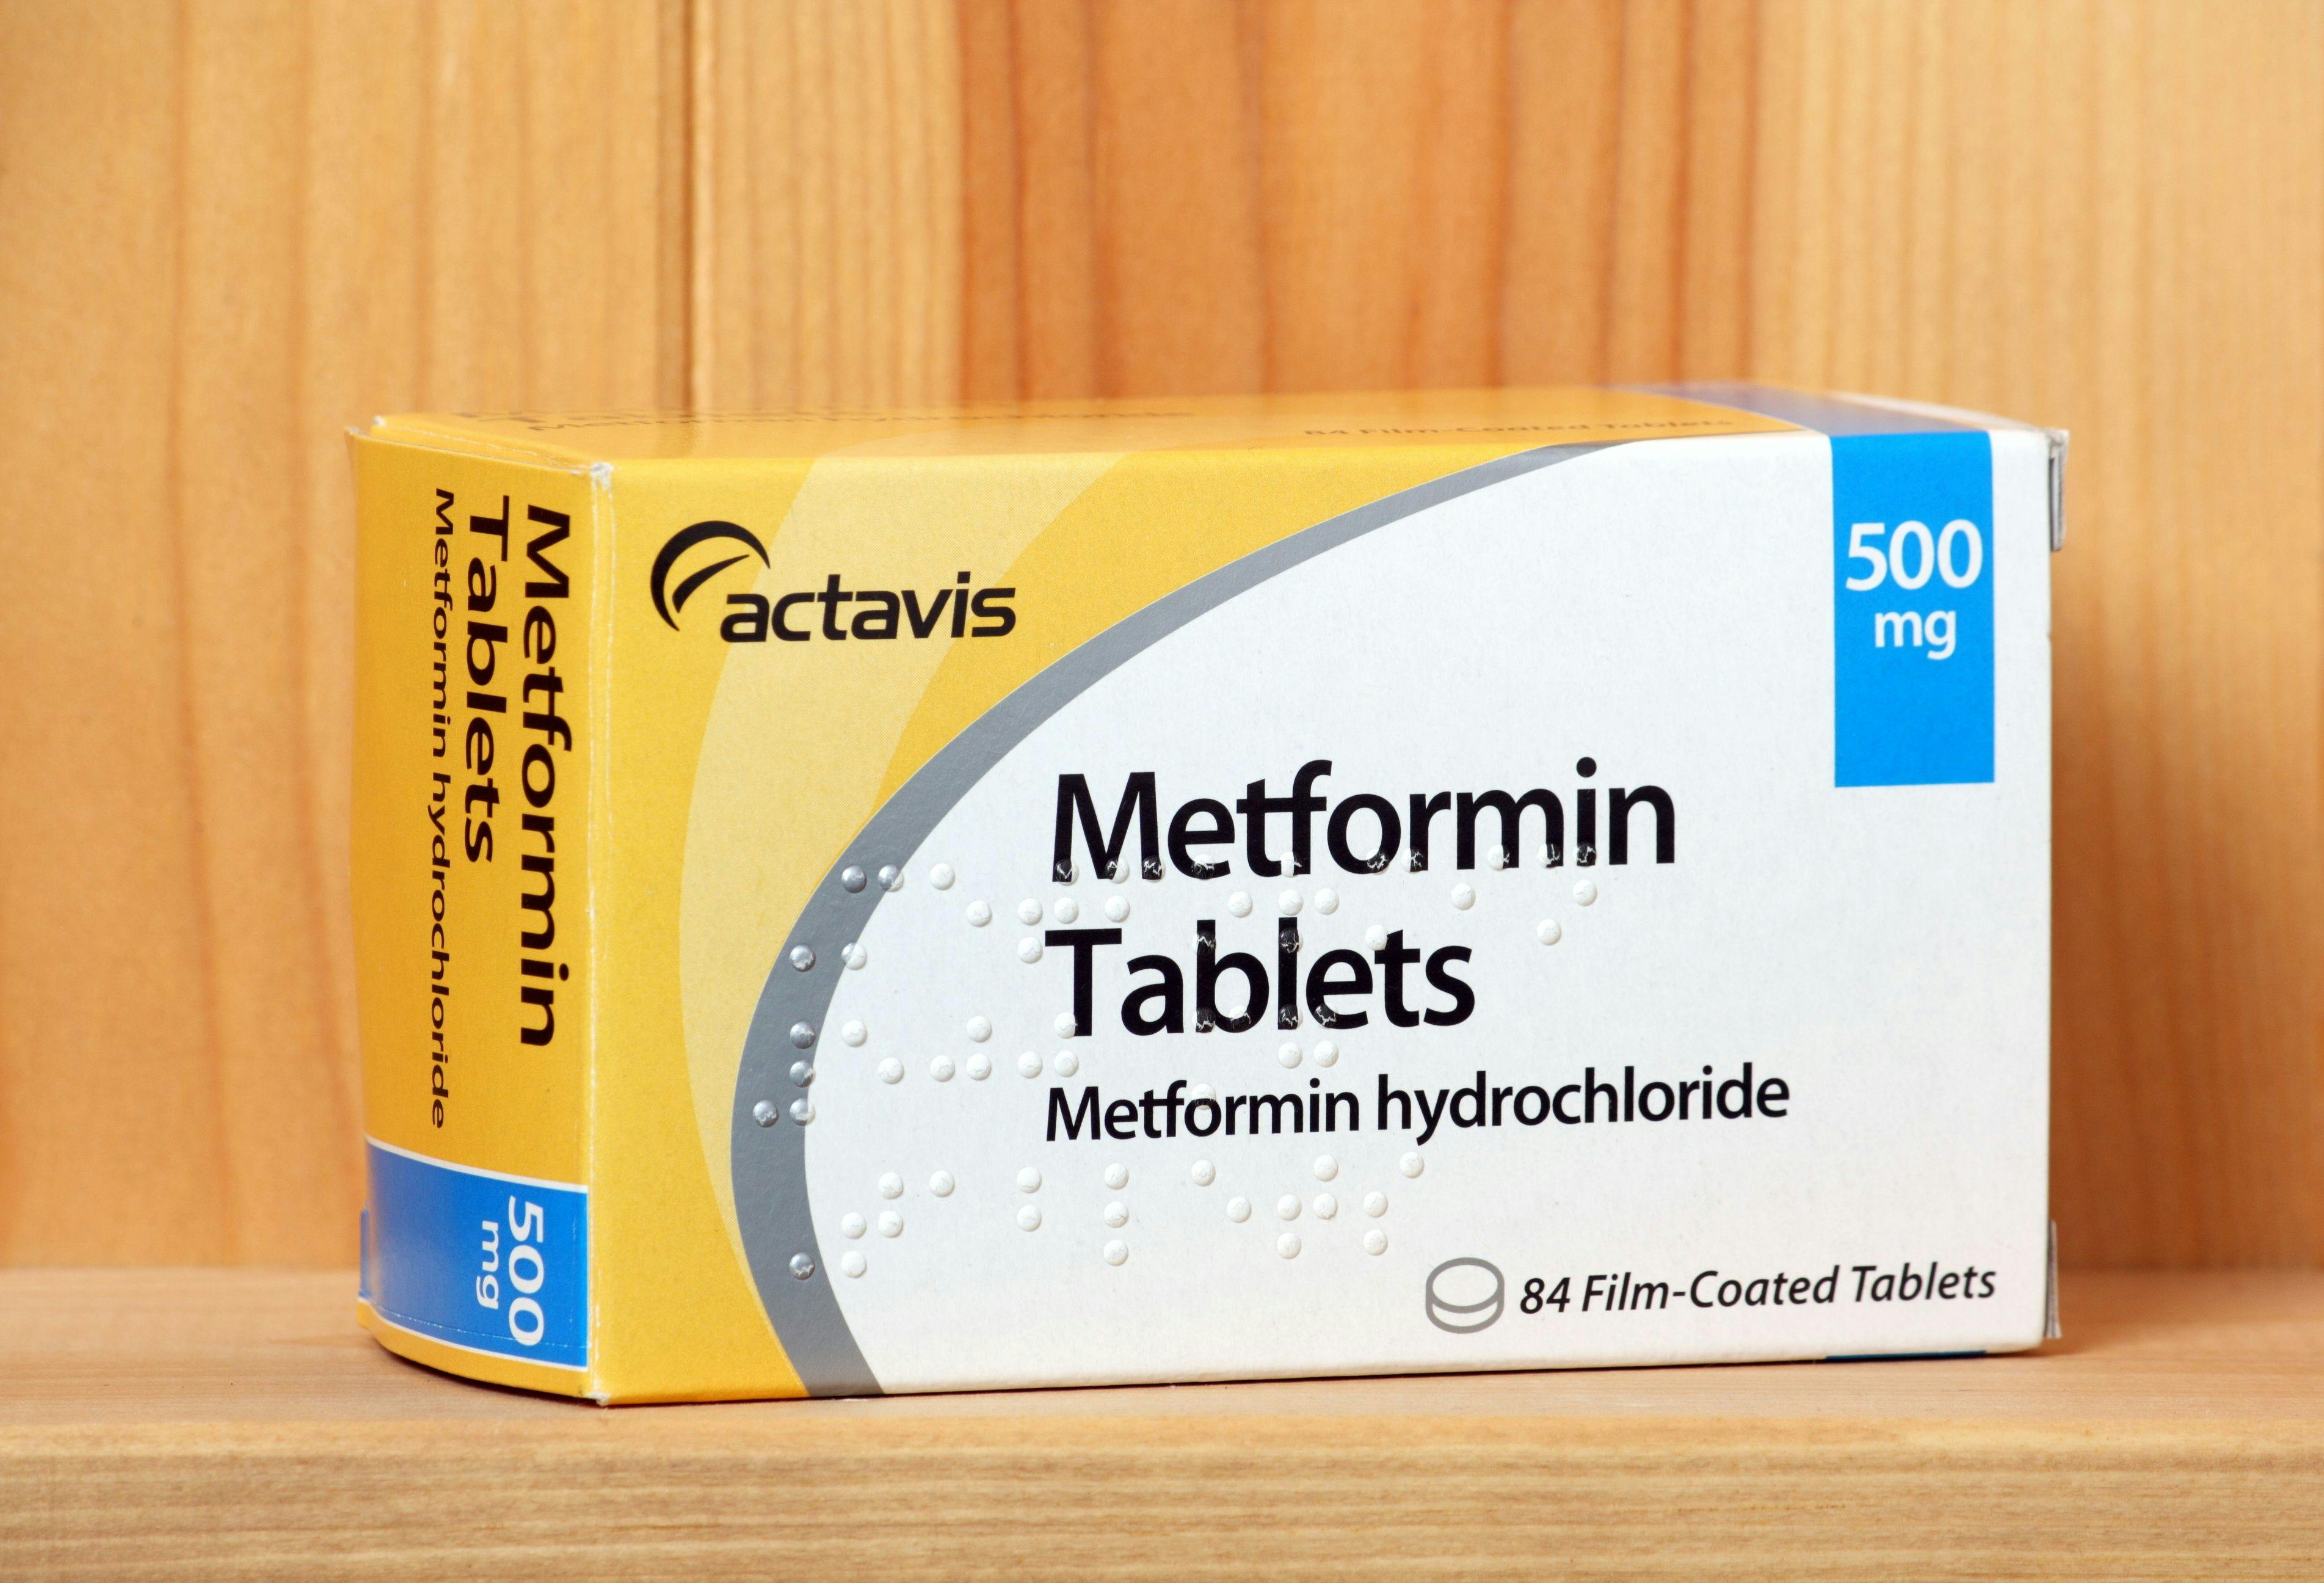 Study results in on metformin and lifestyle interventions for diabetes  